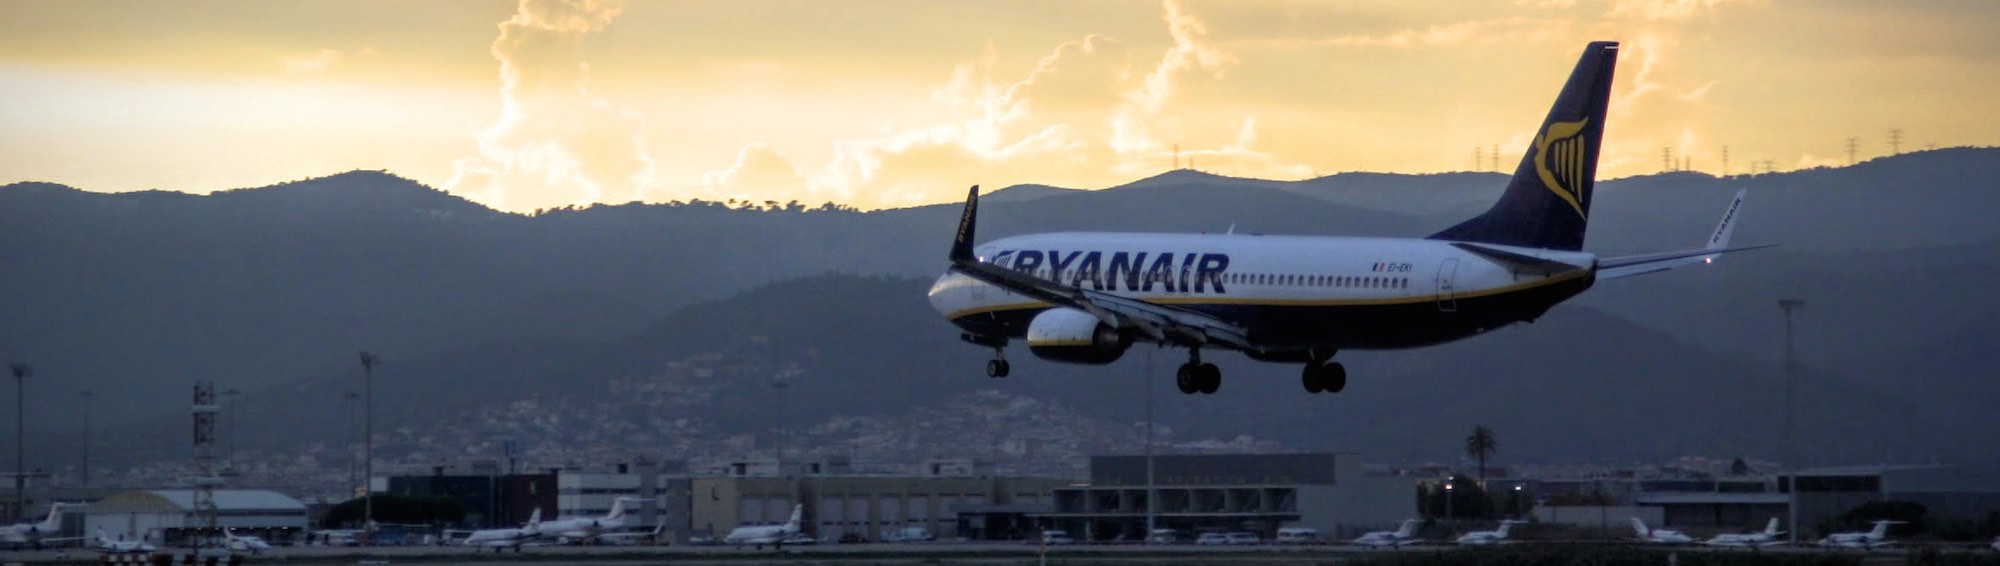 Best time to book flights for Sarajevo (SJJ) to Bergamo (BGY) flights with Ryanair at AirHint